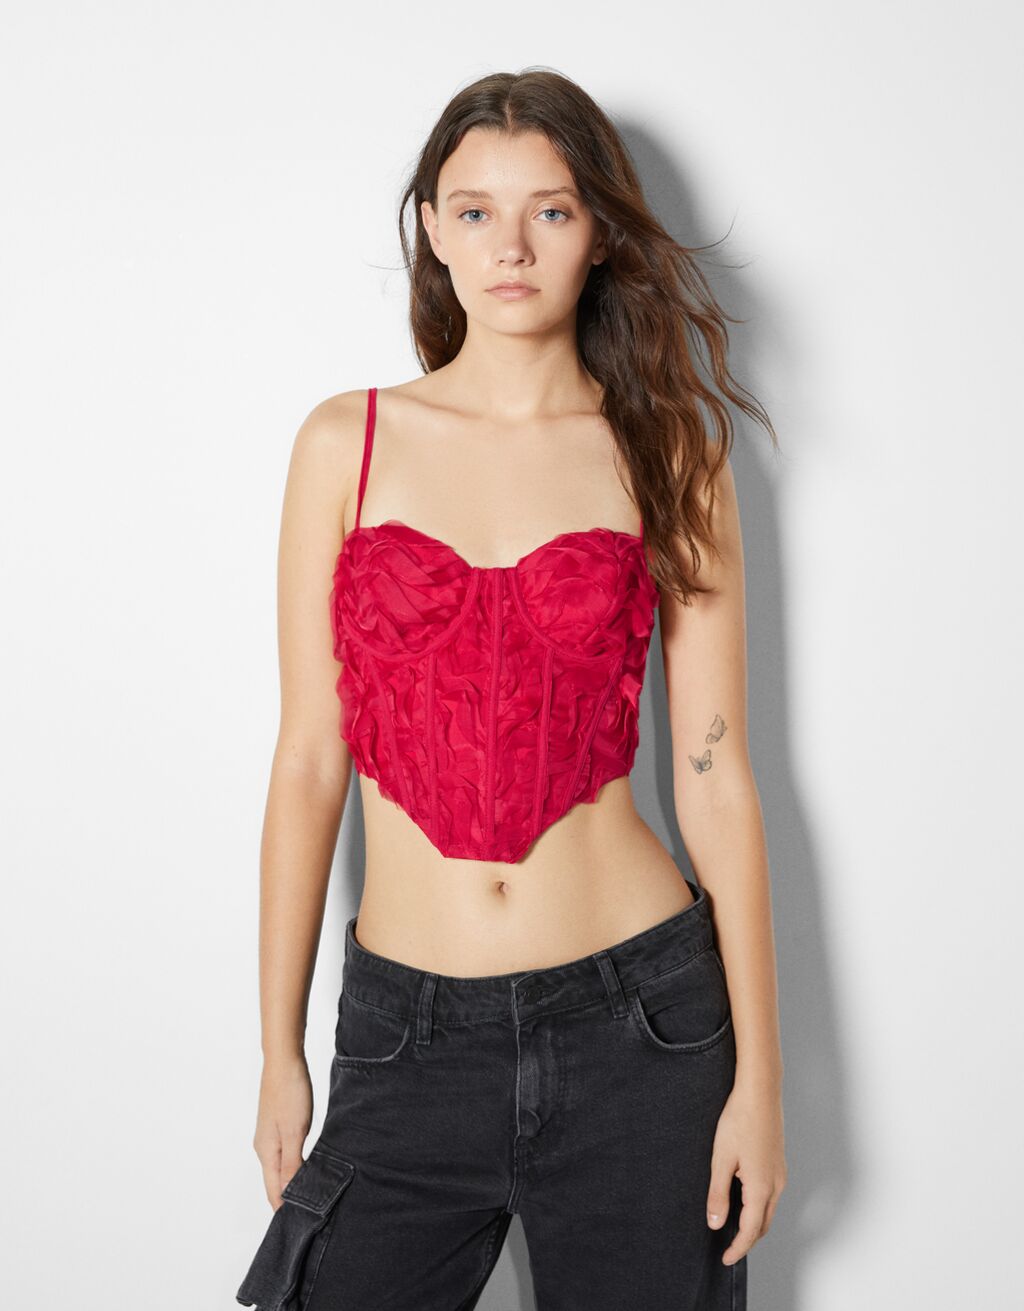 3D strappy corset top